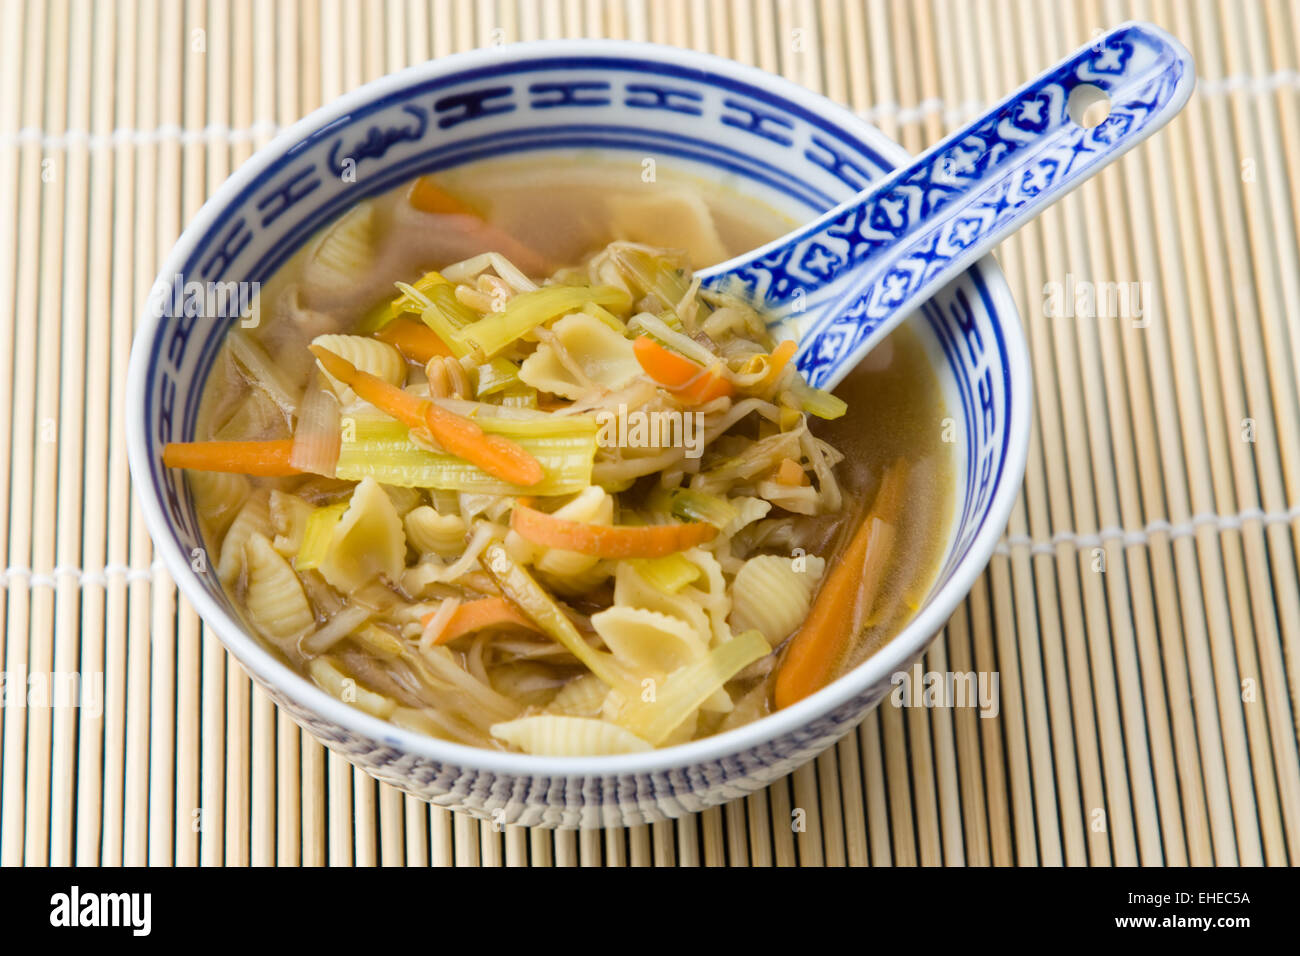 Asiatische Nudelsuppe - Asian Noodle Soup Stock Photo